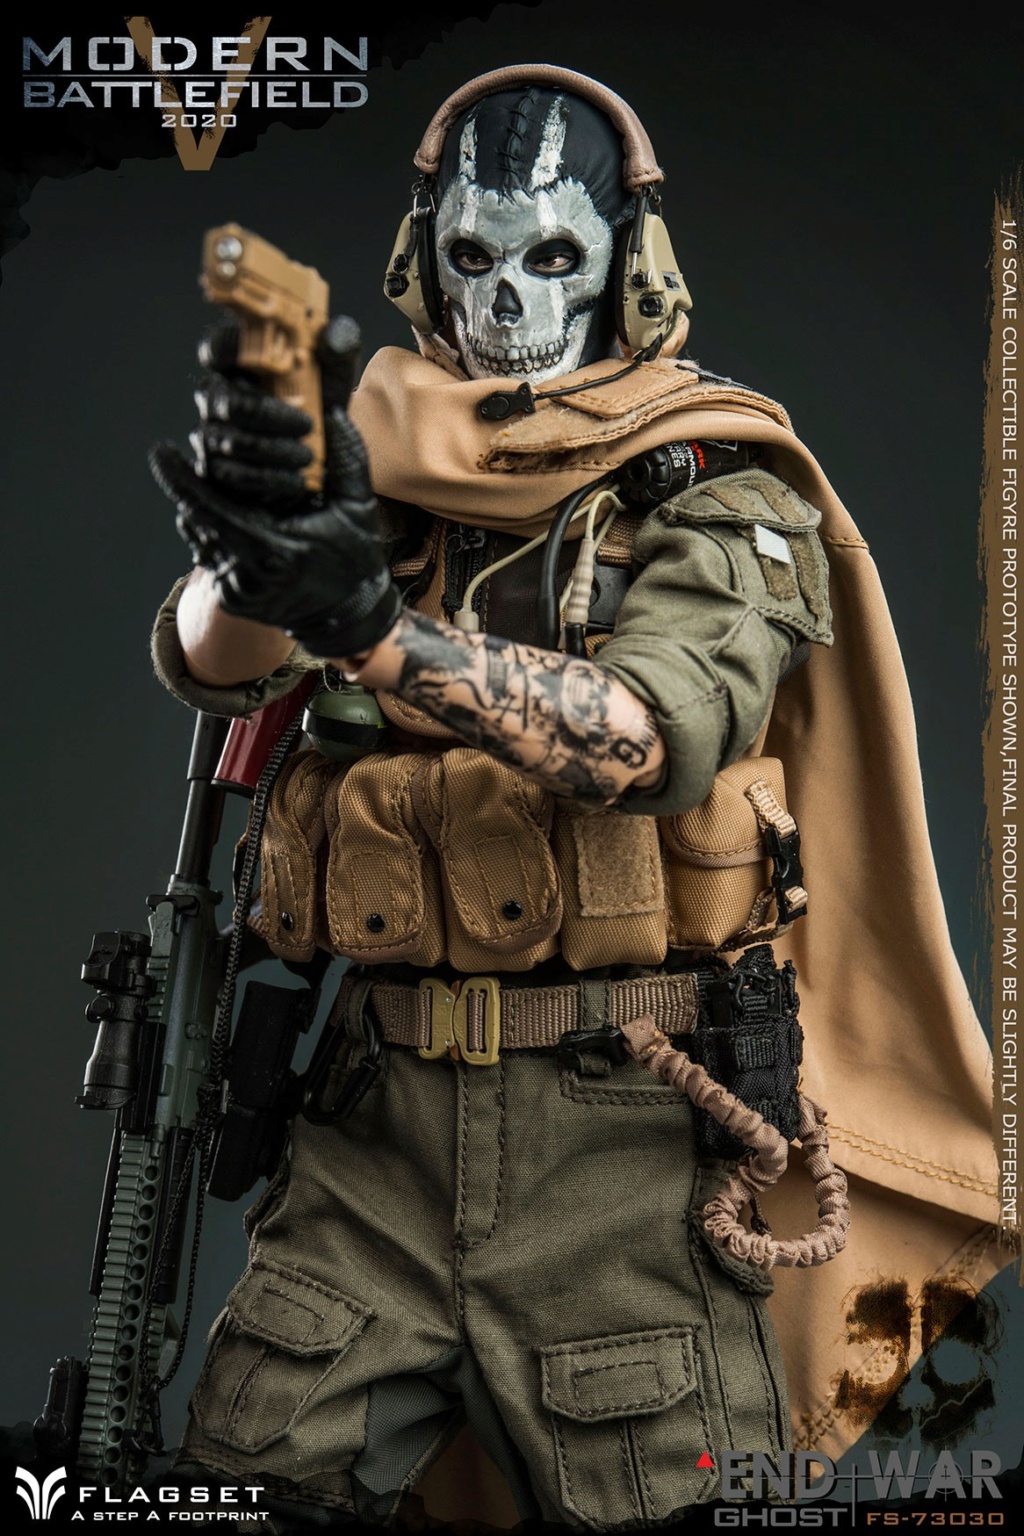 FlagSet - NEW PRODUCT: FLAGSET: 1/6 SCALE FIGURE MODERN BATTLEFIELD END WAR V GHOST 19255210